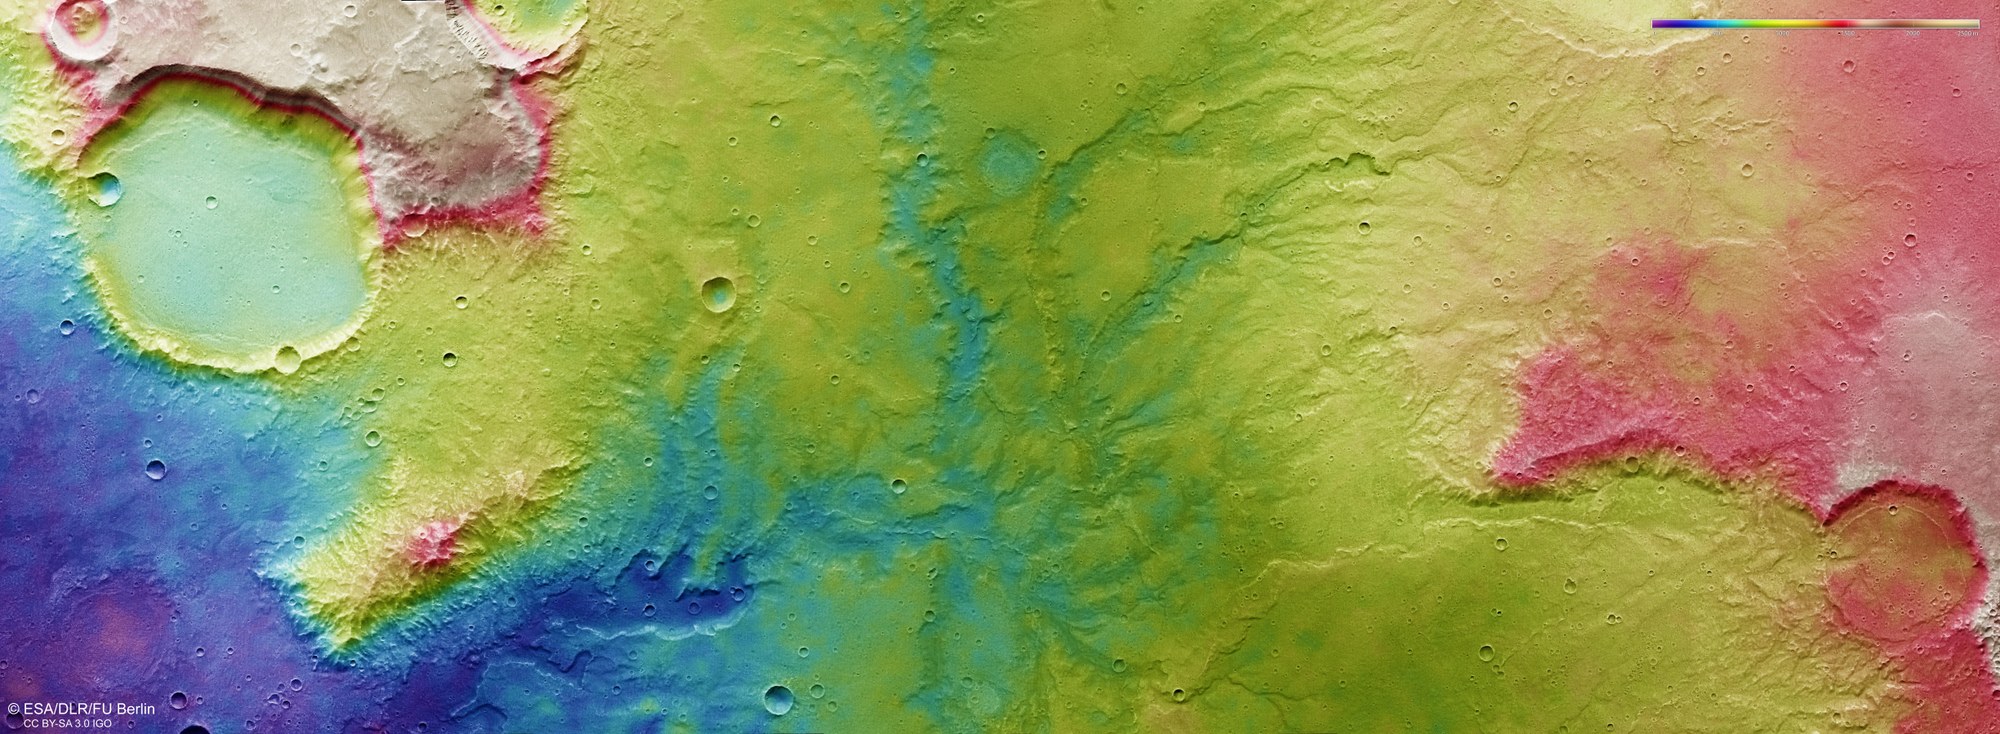 Colour-coded topographic map of a valley network east of Huygens Crater